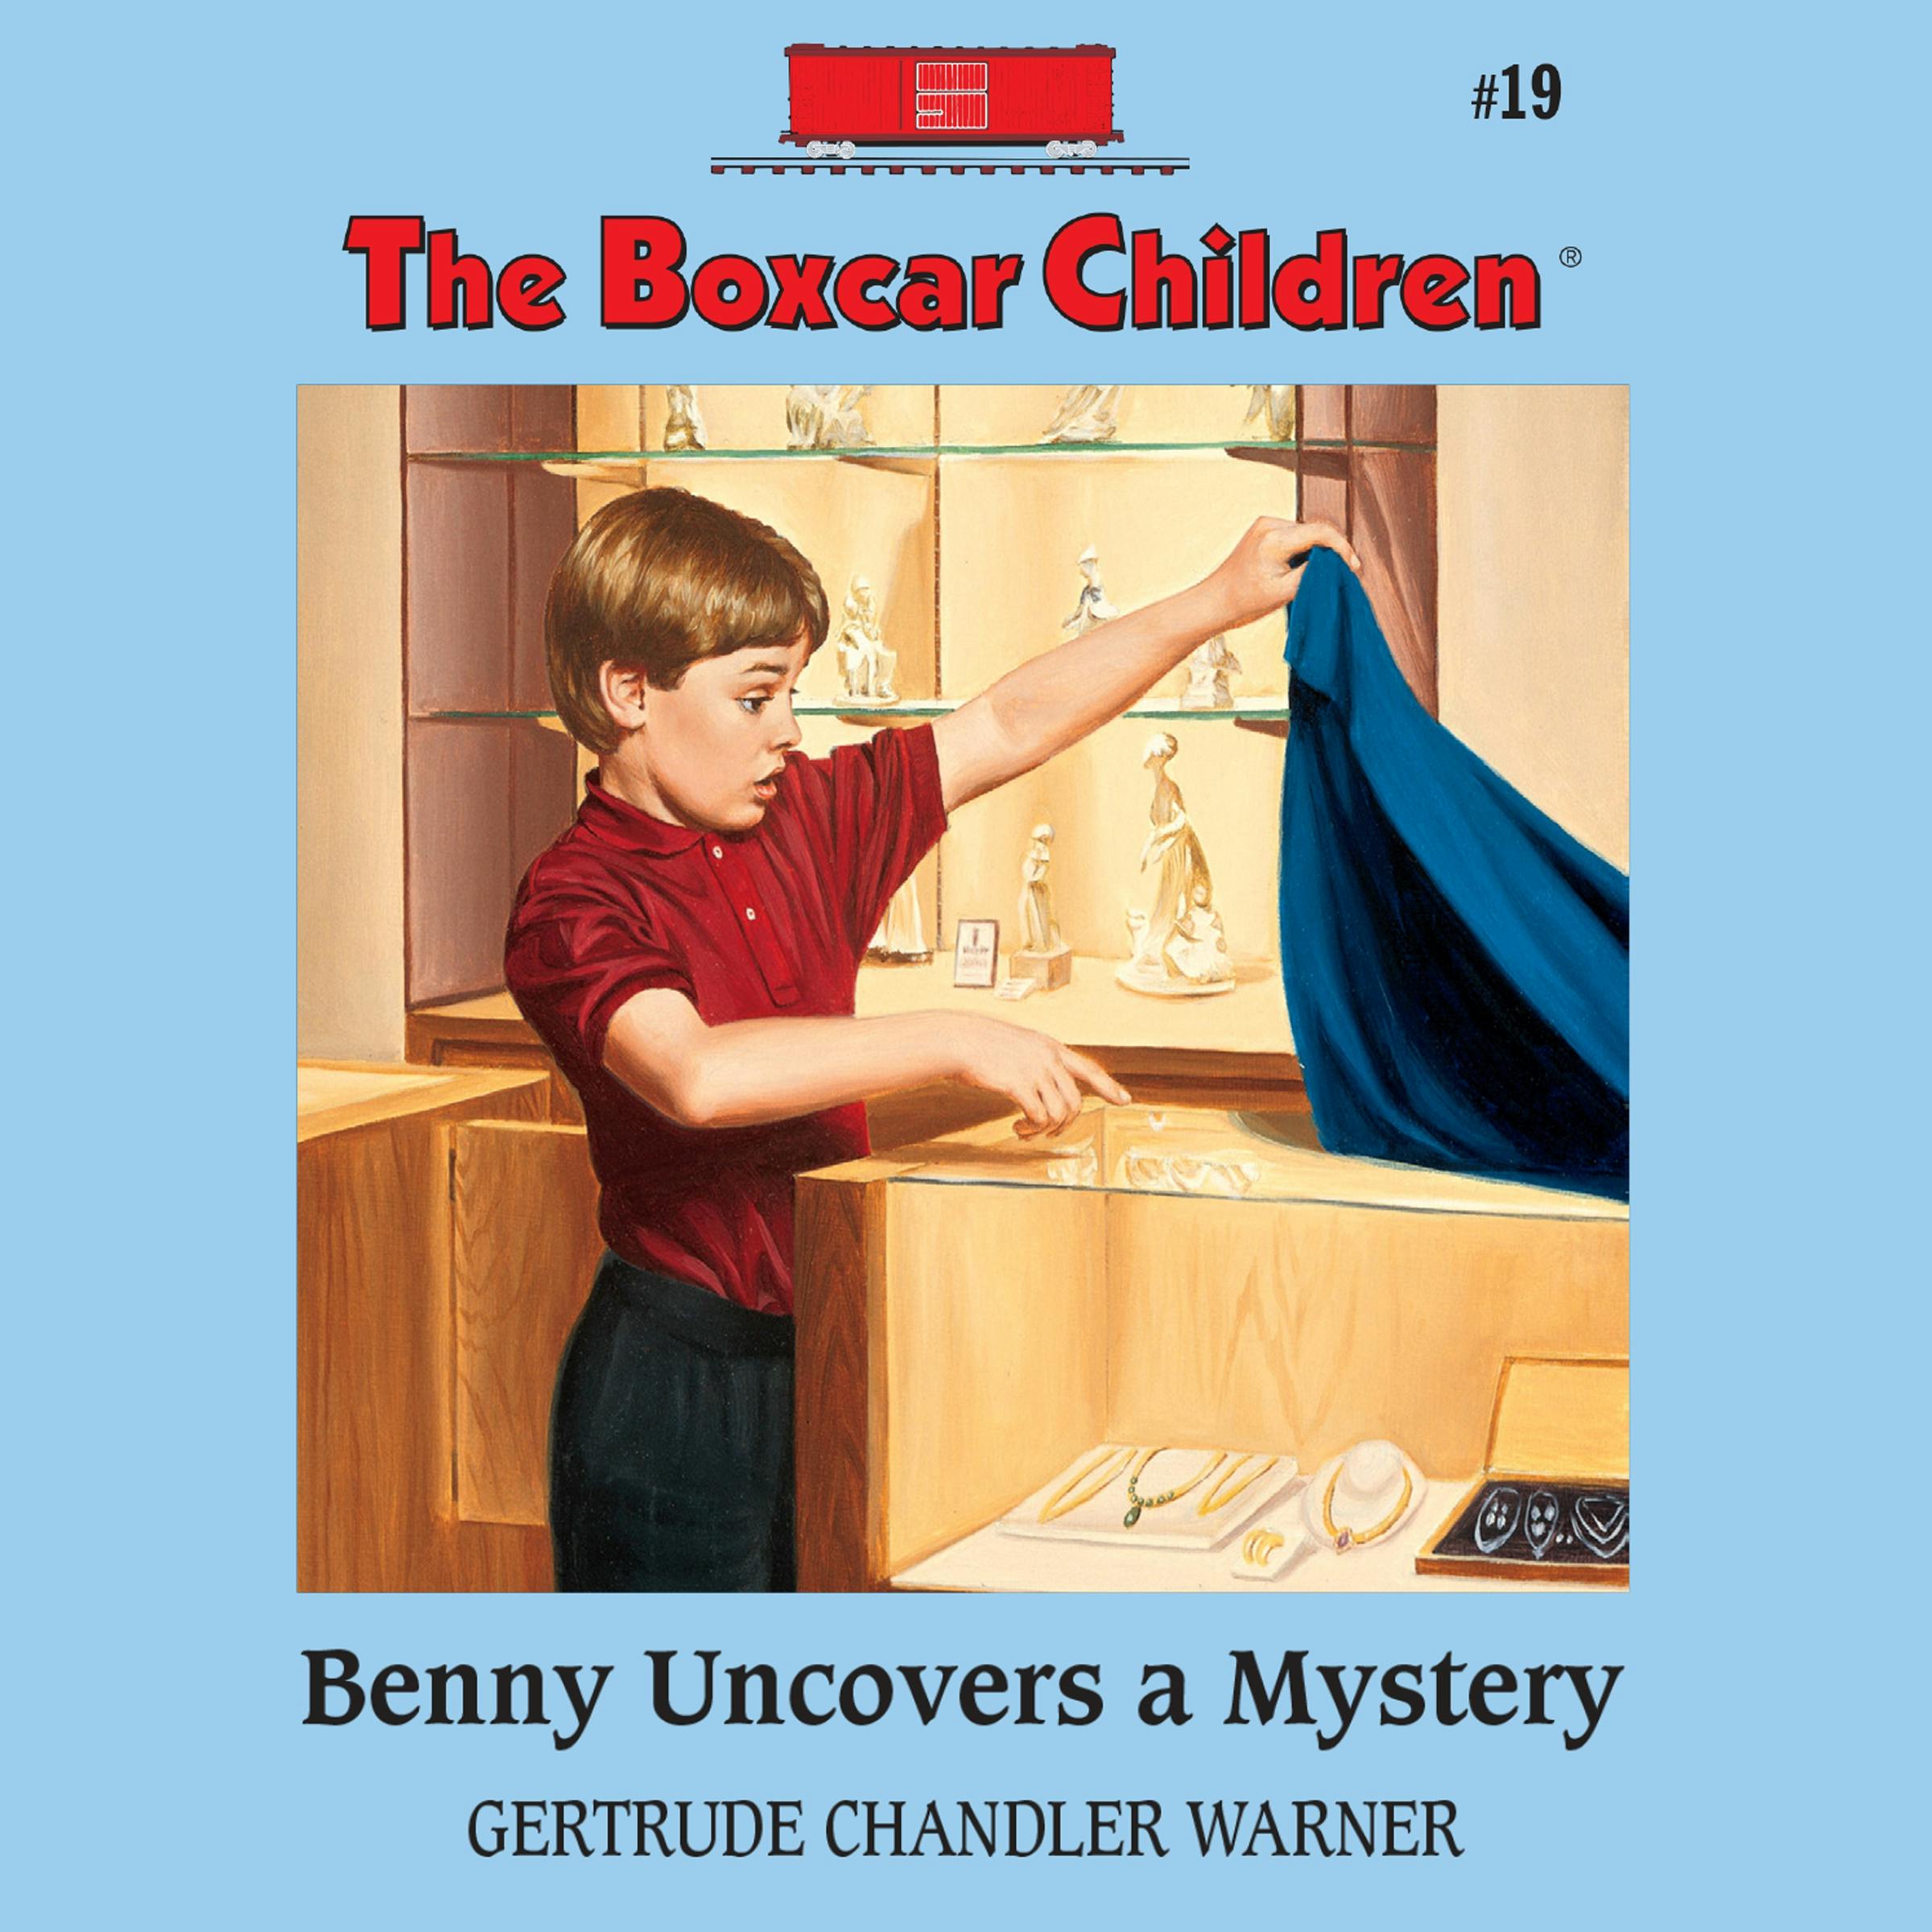 Benny Uncovers a Mystery - Gertrude Chandler Warner